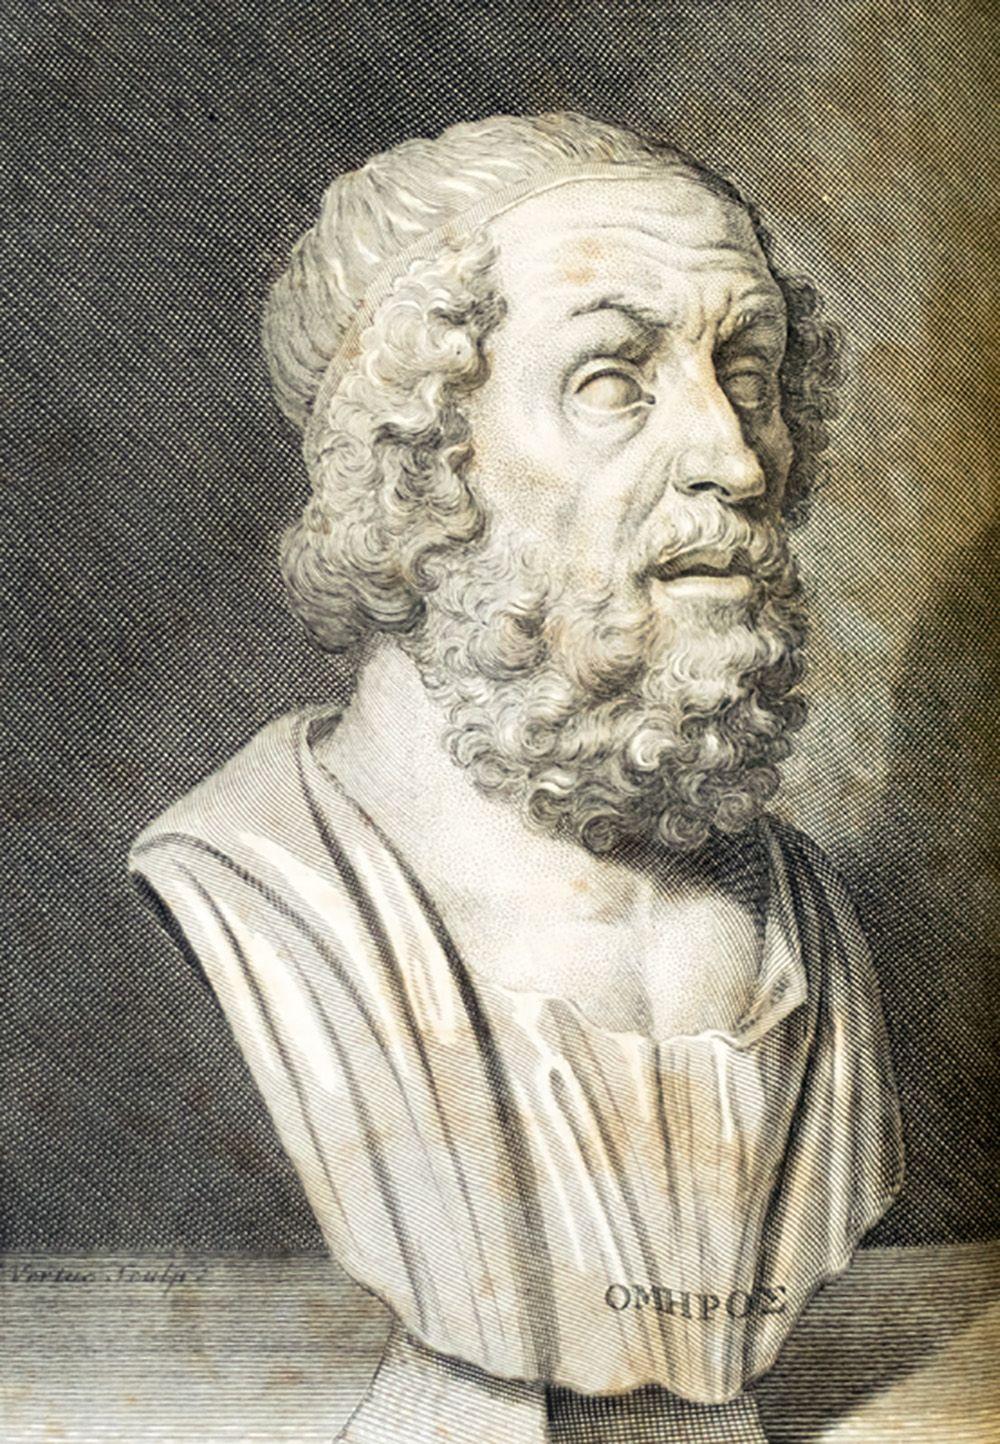 Two Epic Poems According to tradition, Homer was a blind poet who wandered from village to village, singing of heroic